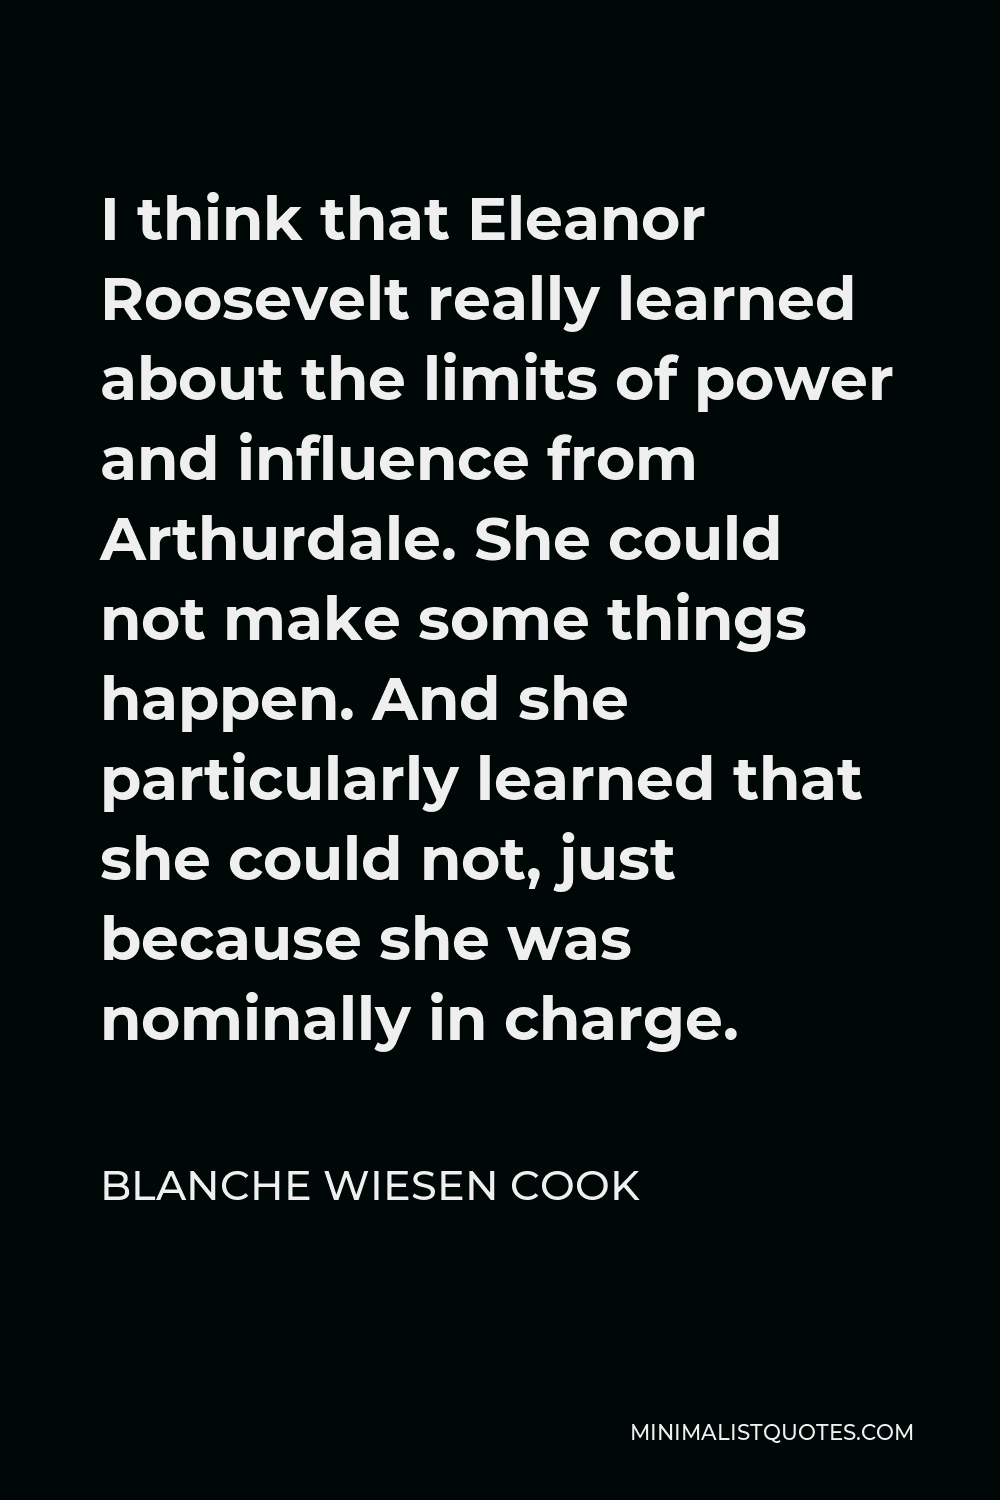 Blanche Wiesen Cook Quote - I think that Eleanor Roosevelt really learned about the limits of power and influence from Arthurdale. She could not make some things happen. And she particularly learned that she could not, just because she was nominally in charge.